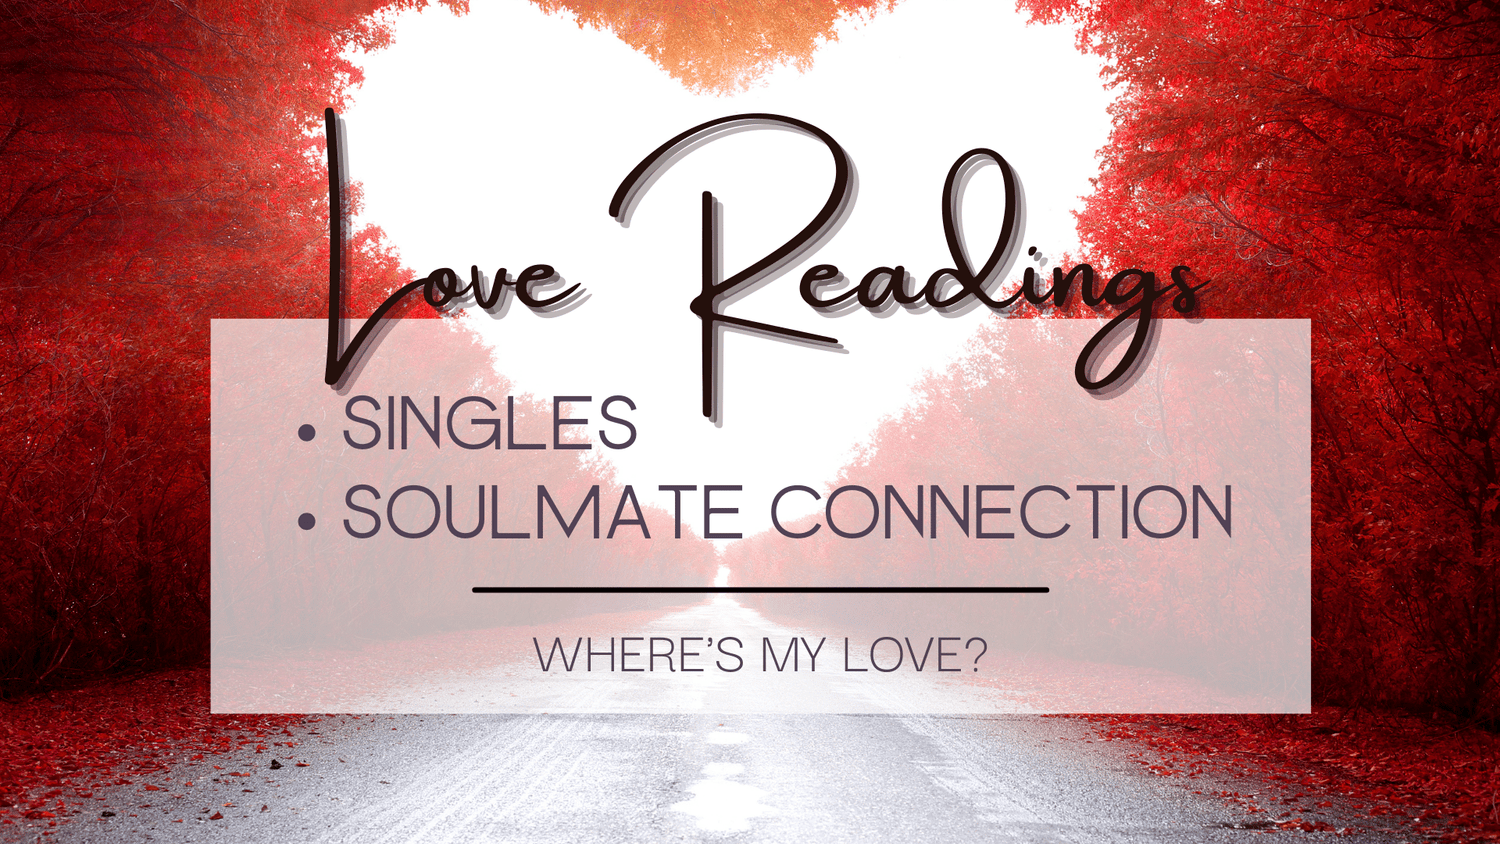 Love Reading - Singles and Soulmate